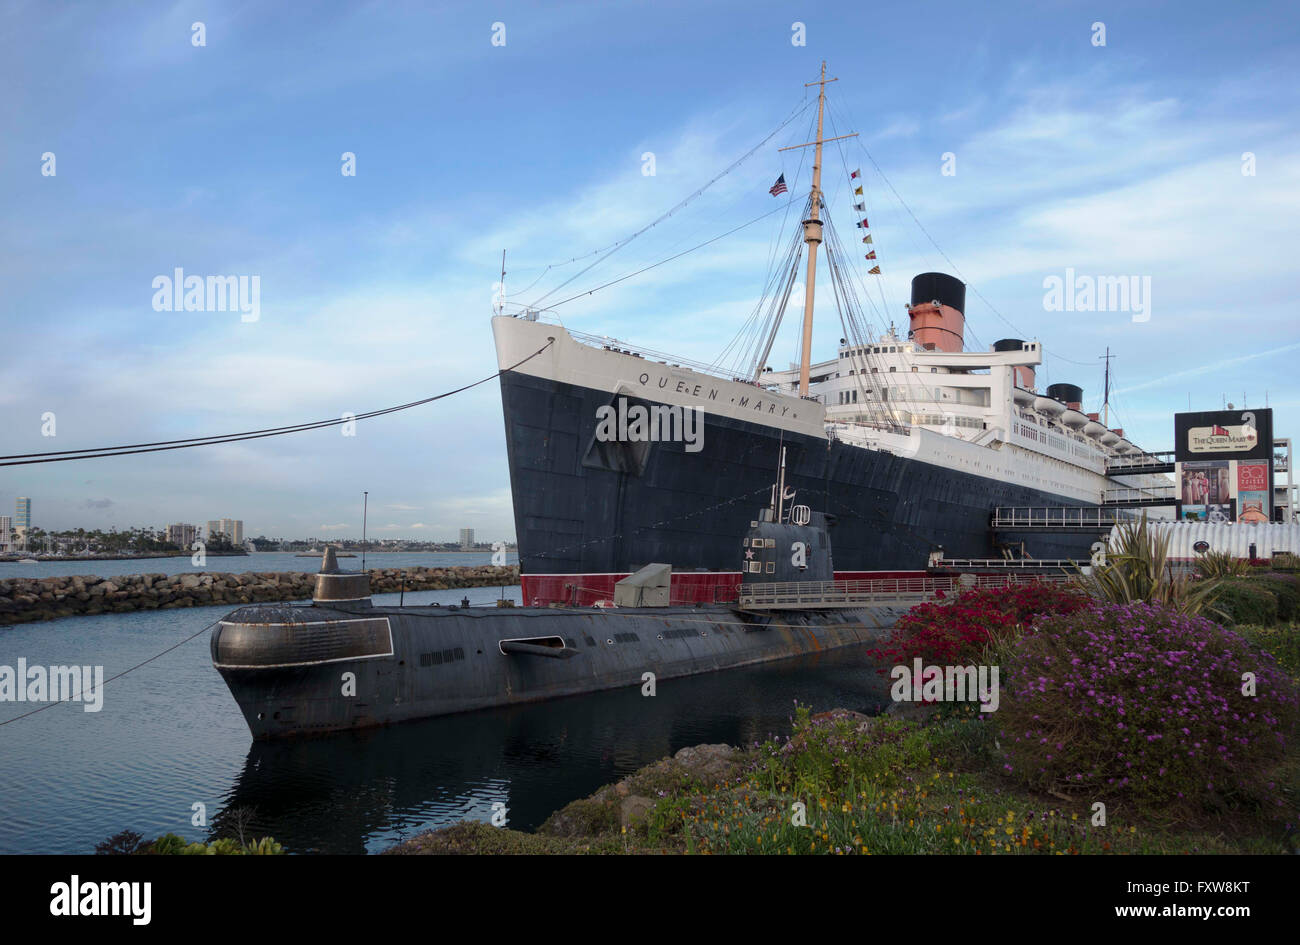 The Queen Mary docked at Longbeach California with the Russian submarine in the foreground Stock Photo